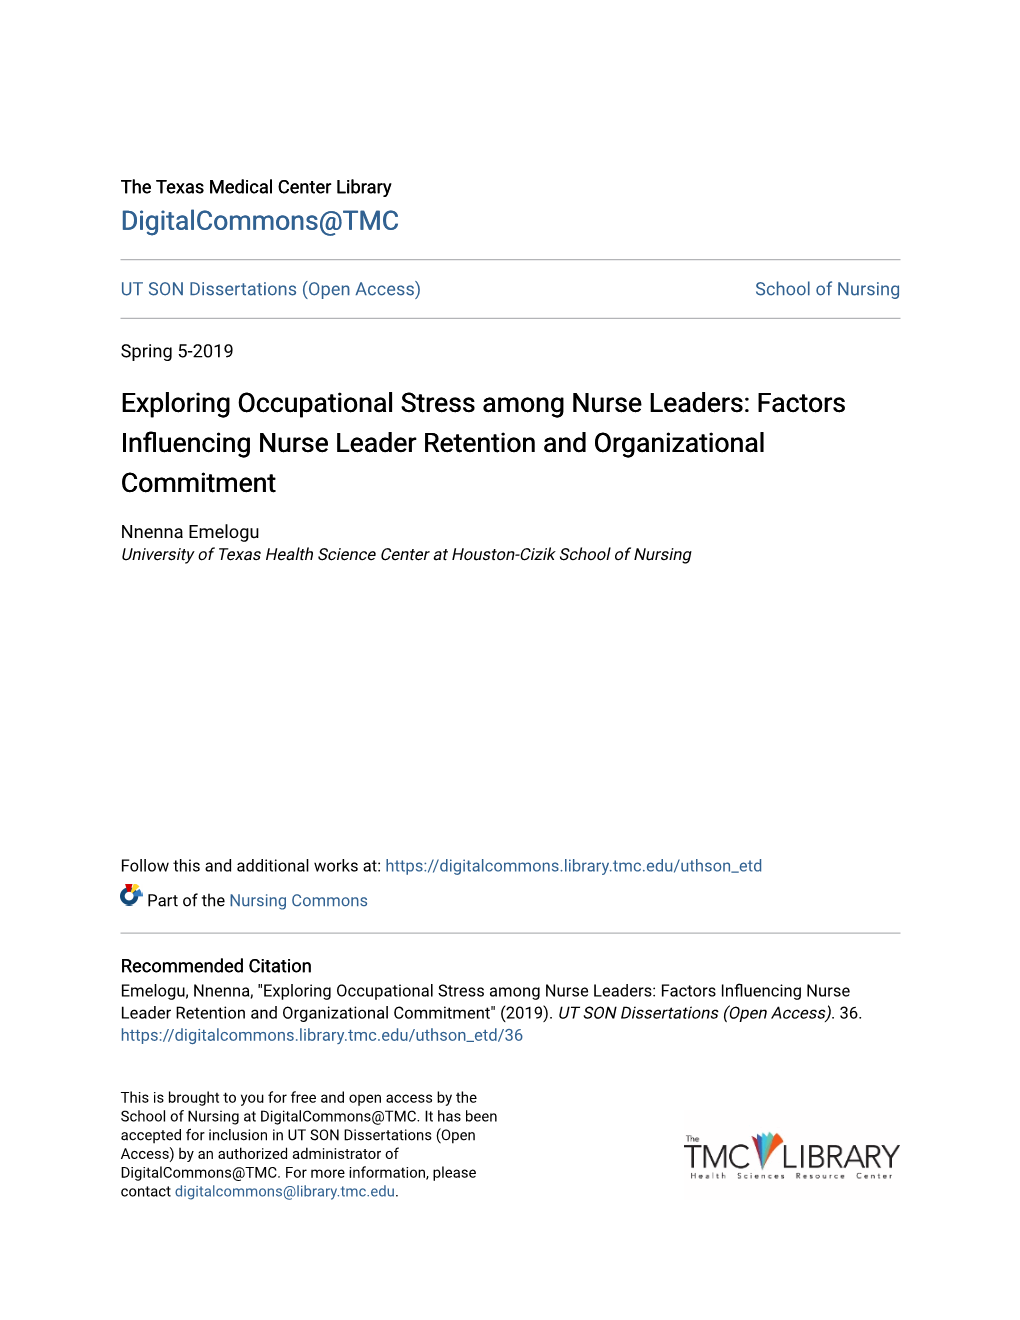 Exploring Occupational Stress Among Nurse Leaders: Factors Influencing Nurse Leader Retention and Organizational Commitment